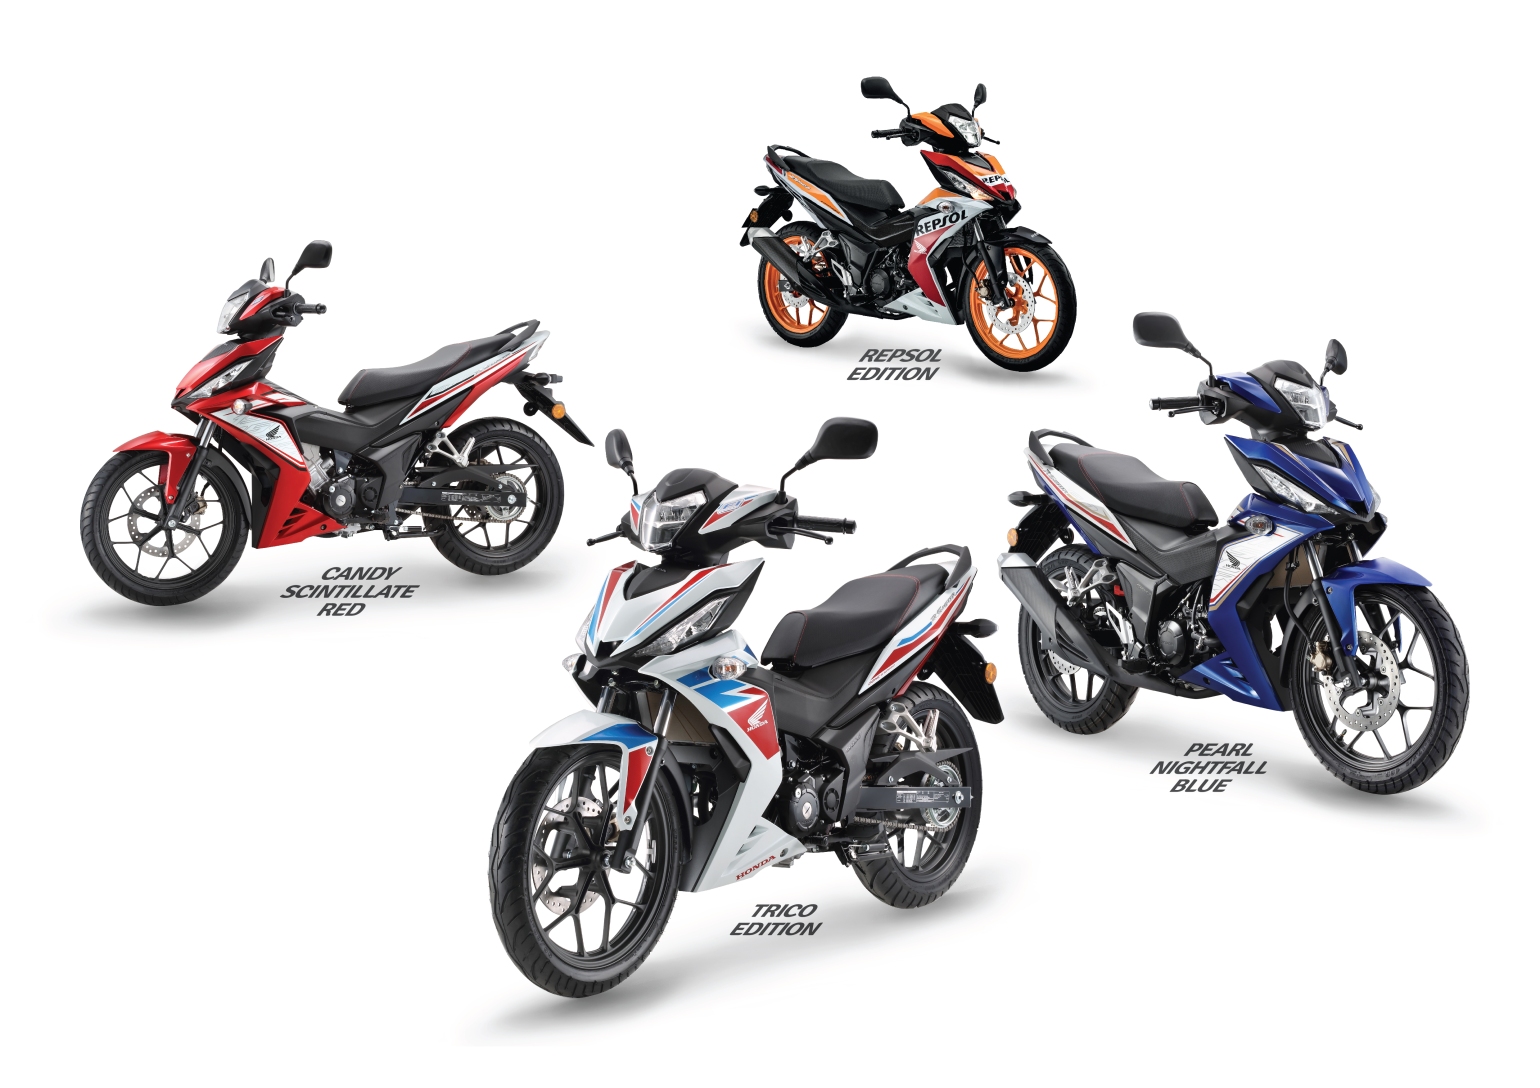 2017 Honda RS150R: New Exciting Colors - Malaysian Riders